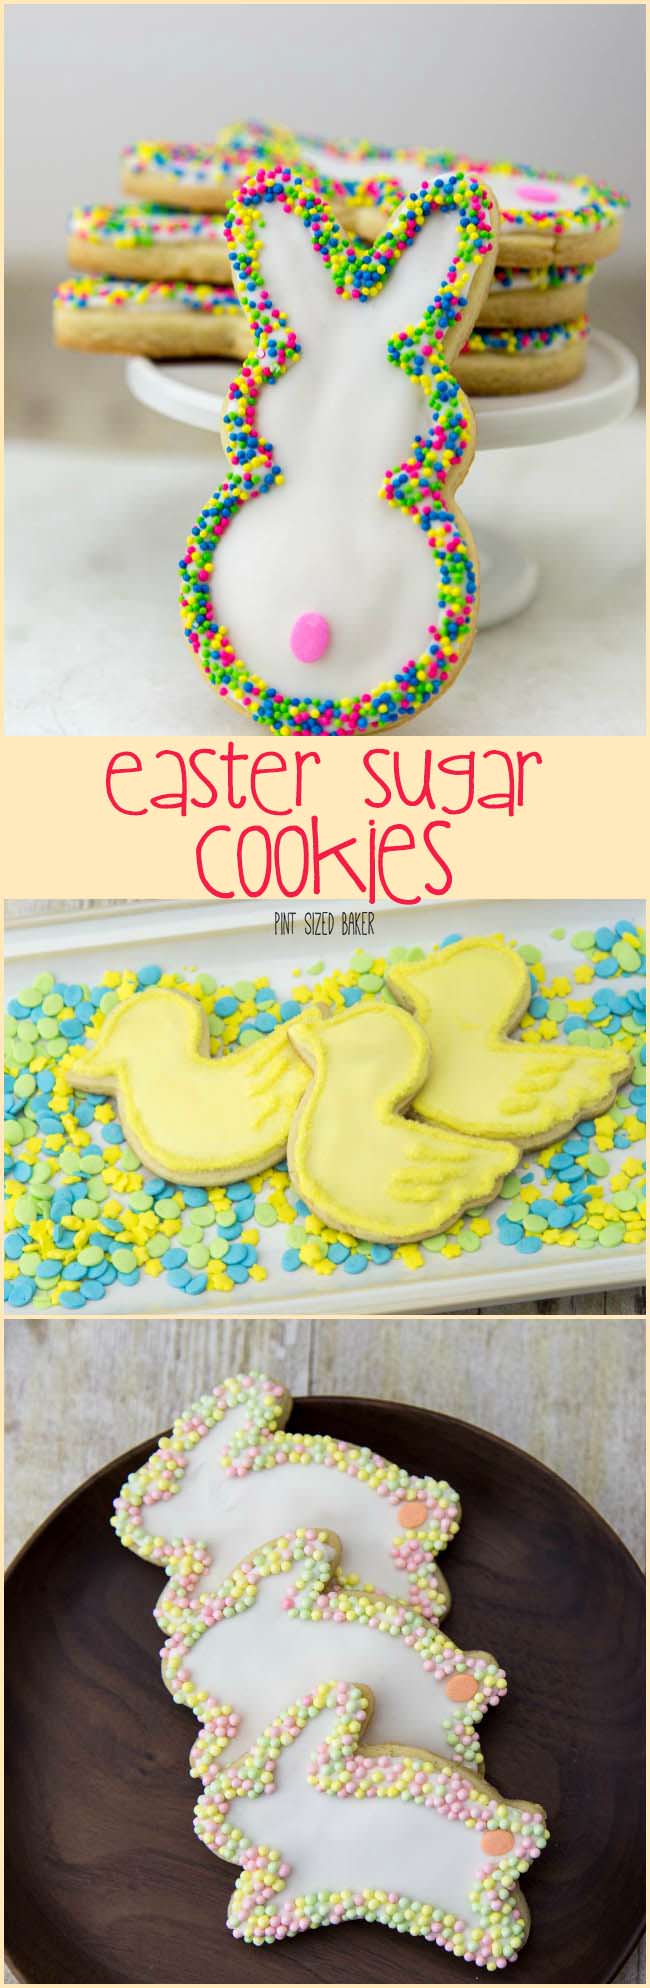 Adorable Easter Sugar Cookies sure were a hit in out household. No special tools or equipment required for these cookies.